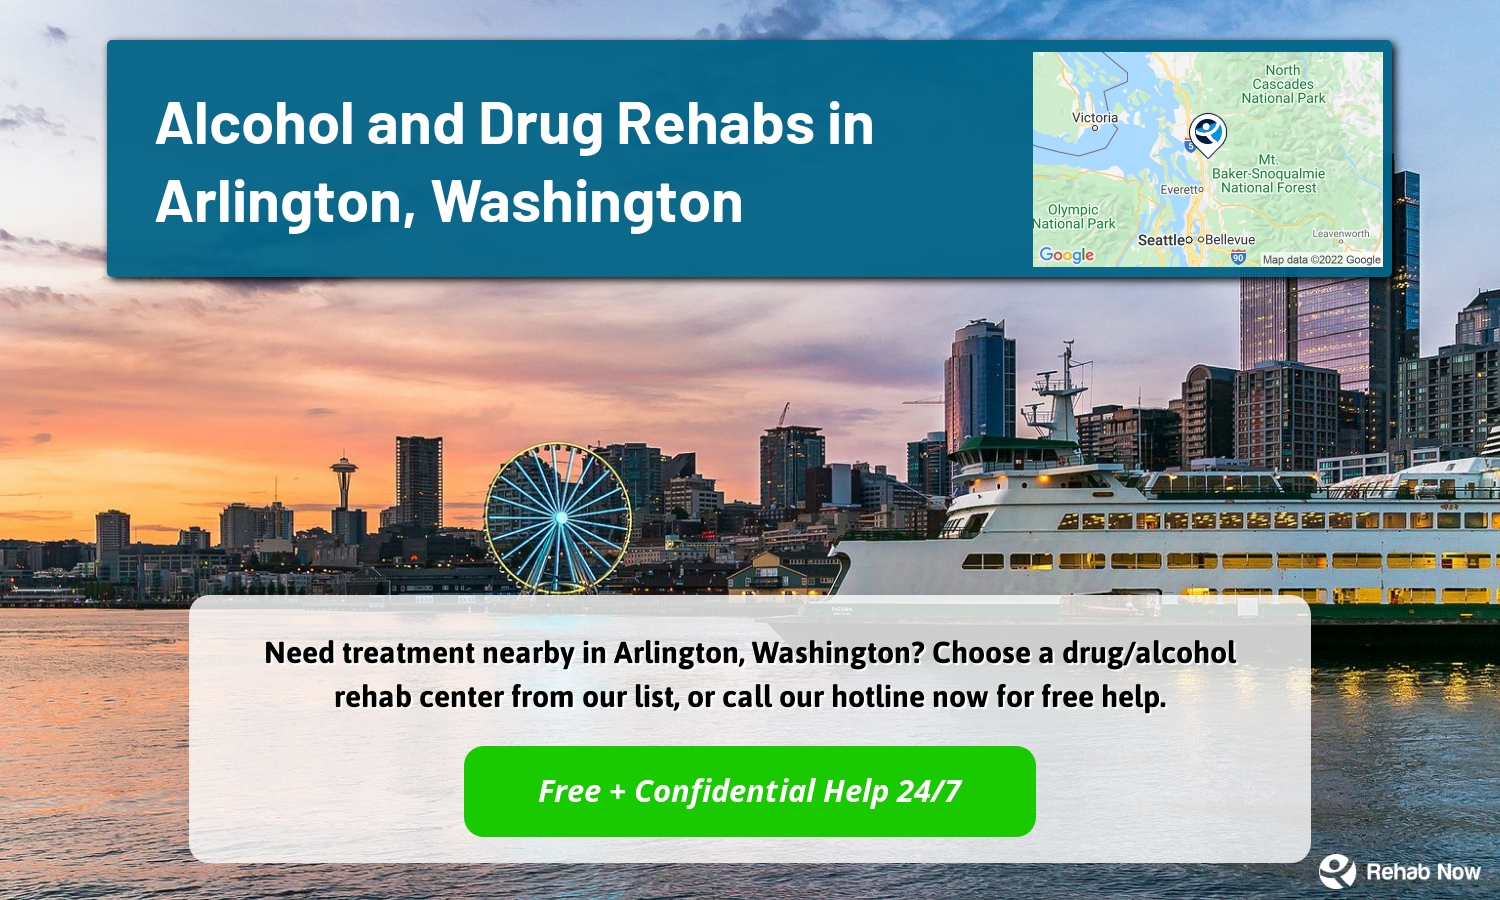 Need treatment nearby in Arlington, Washington? Choose a drug/alcohol rehab center from our list, or call our hotline now for free help.